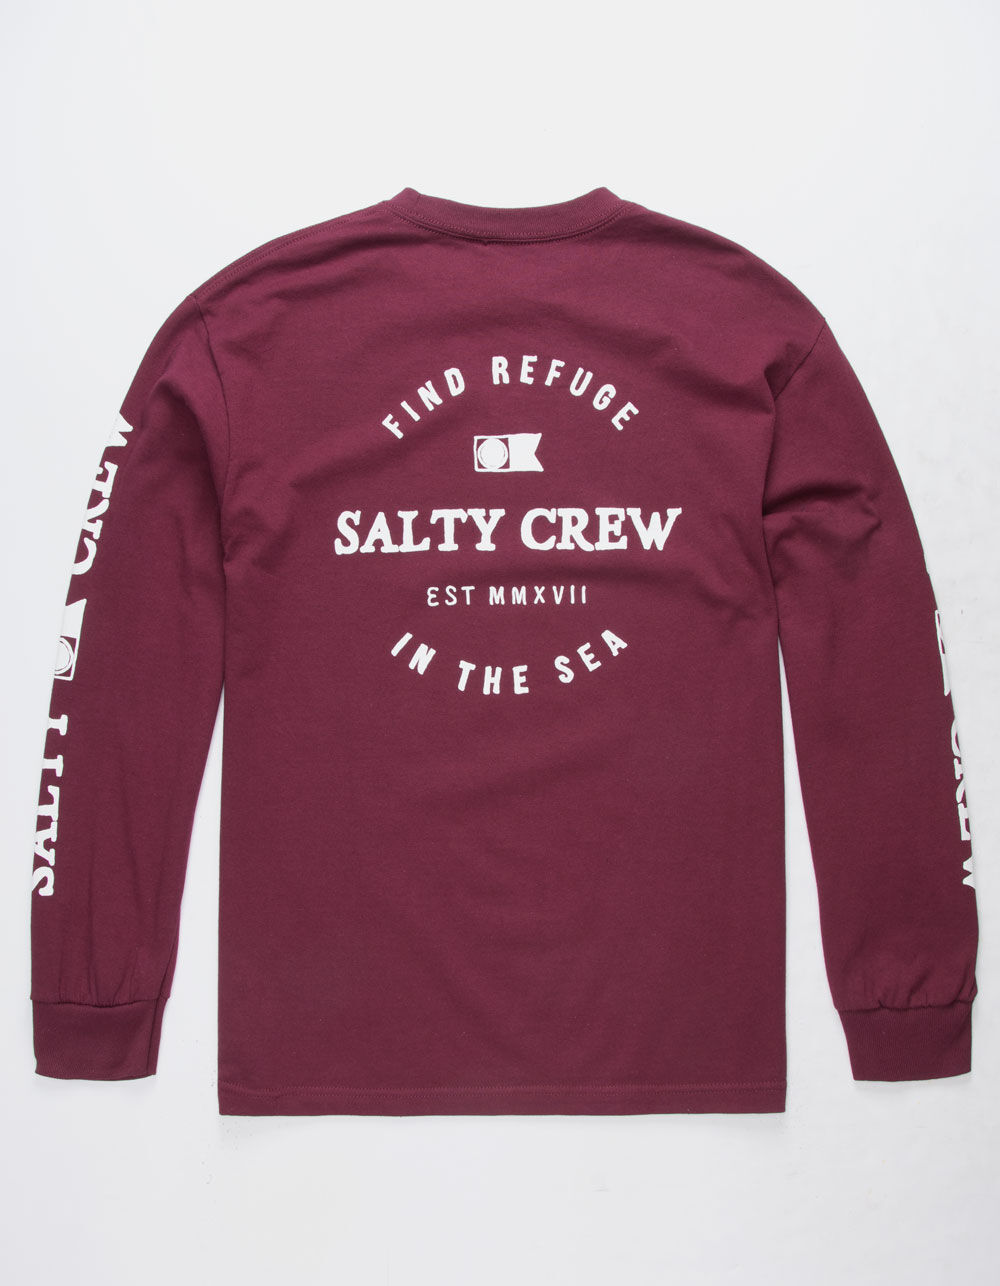 SALTY CREW Scallywag Mens T-Shirt image number 0